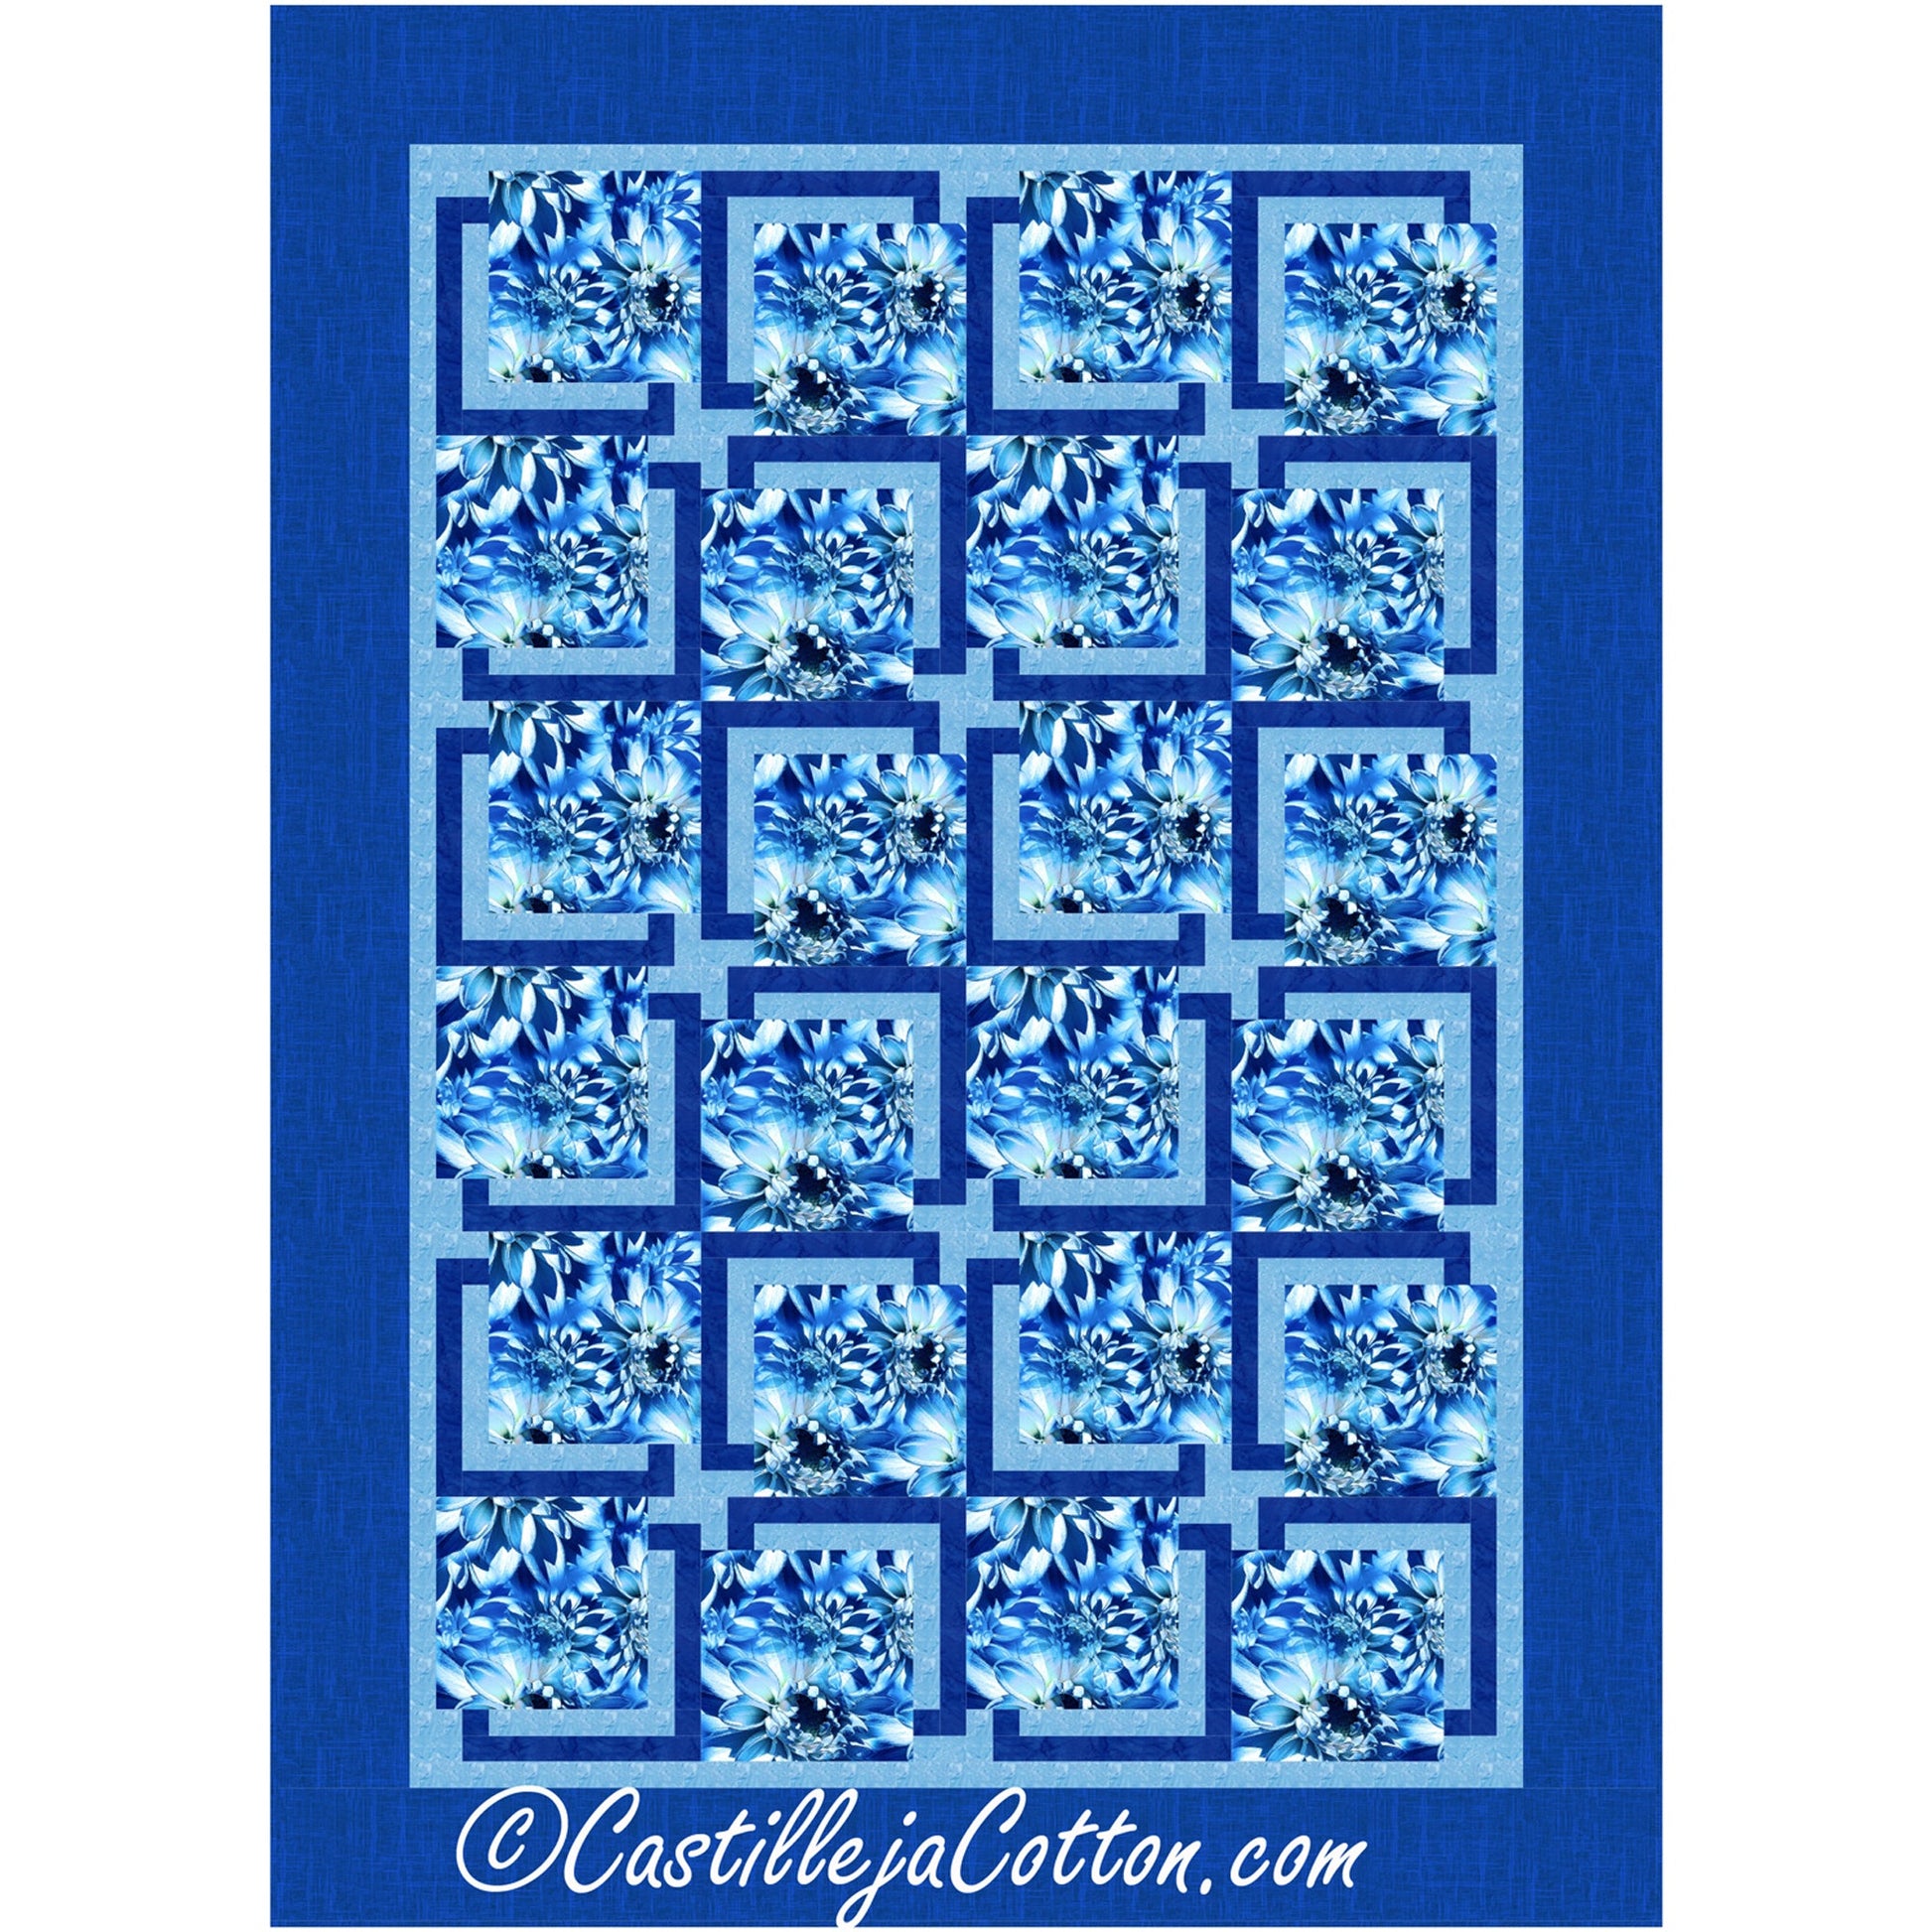 A stunning quilt featuring a combination of blue and white colors, embellished with lovely blue and white flowers.